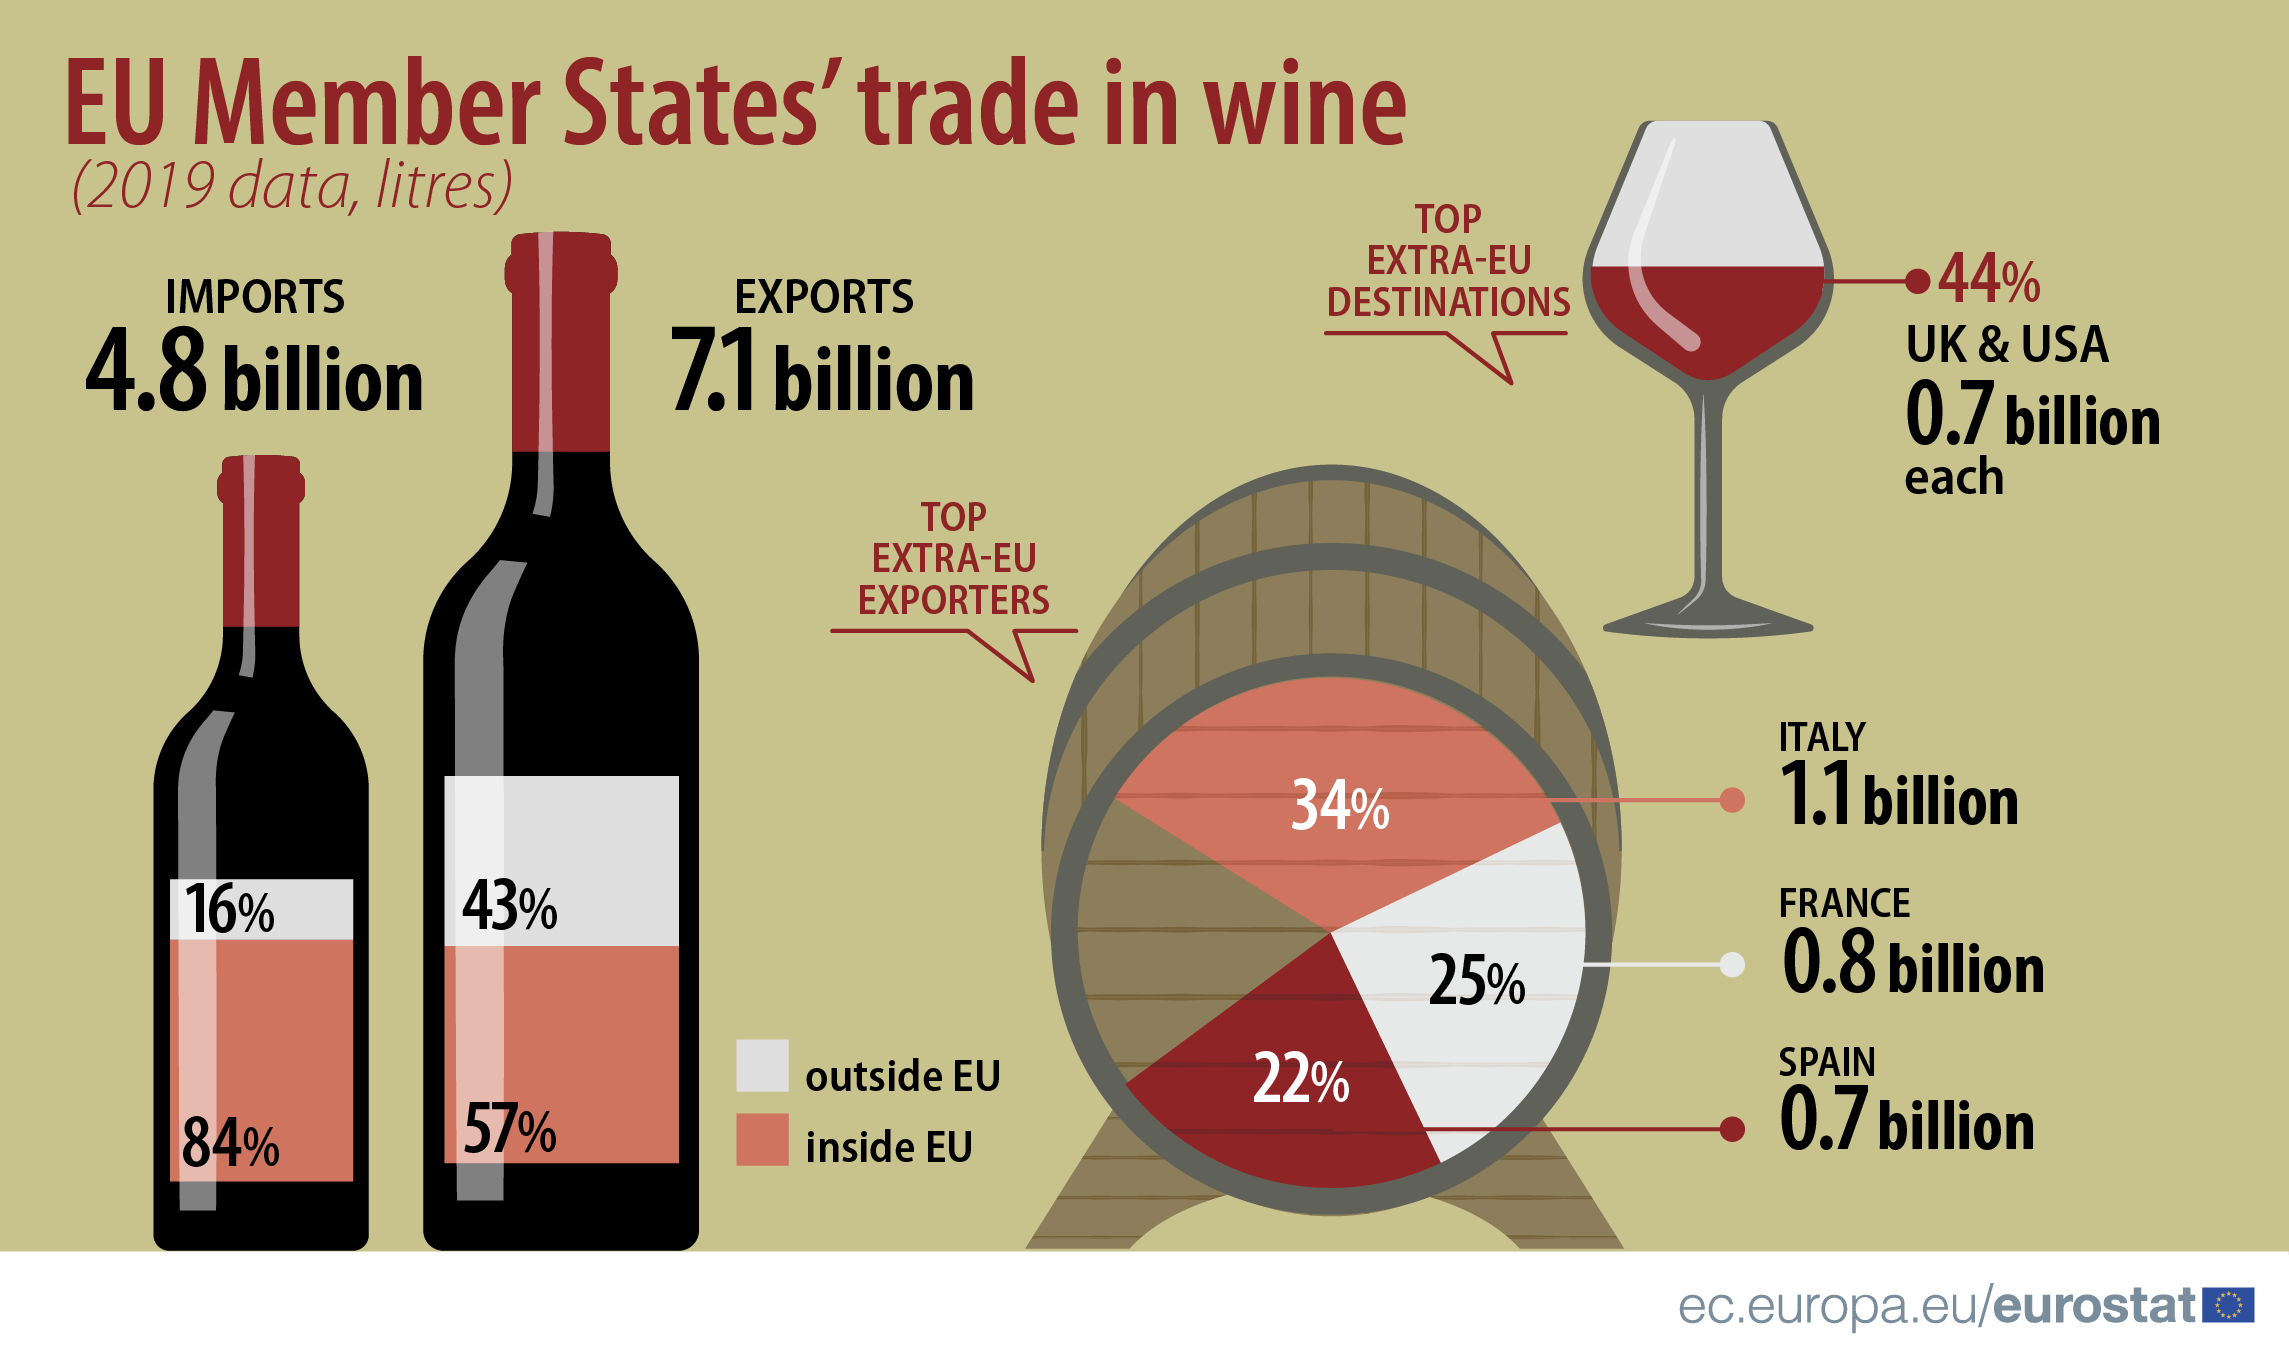 film nationalisme Værdiløs Wine production and trade in the EU - Products Eurostat News - Eurostat